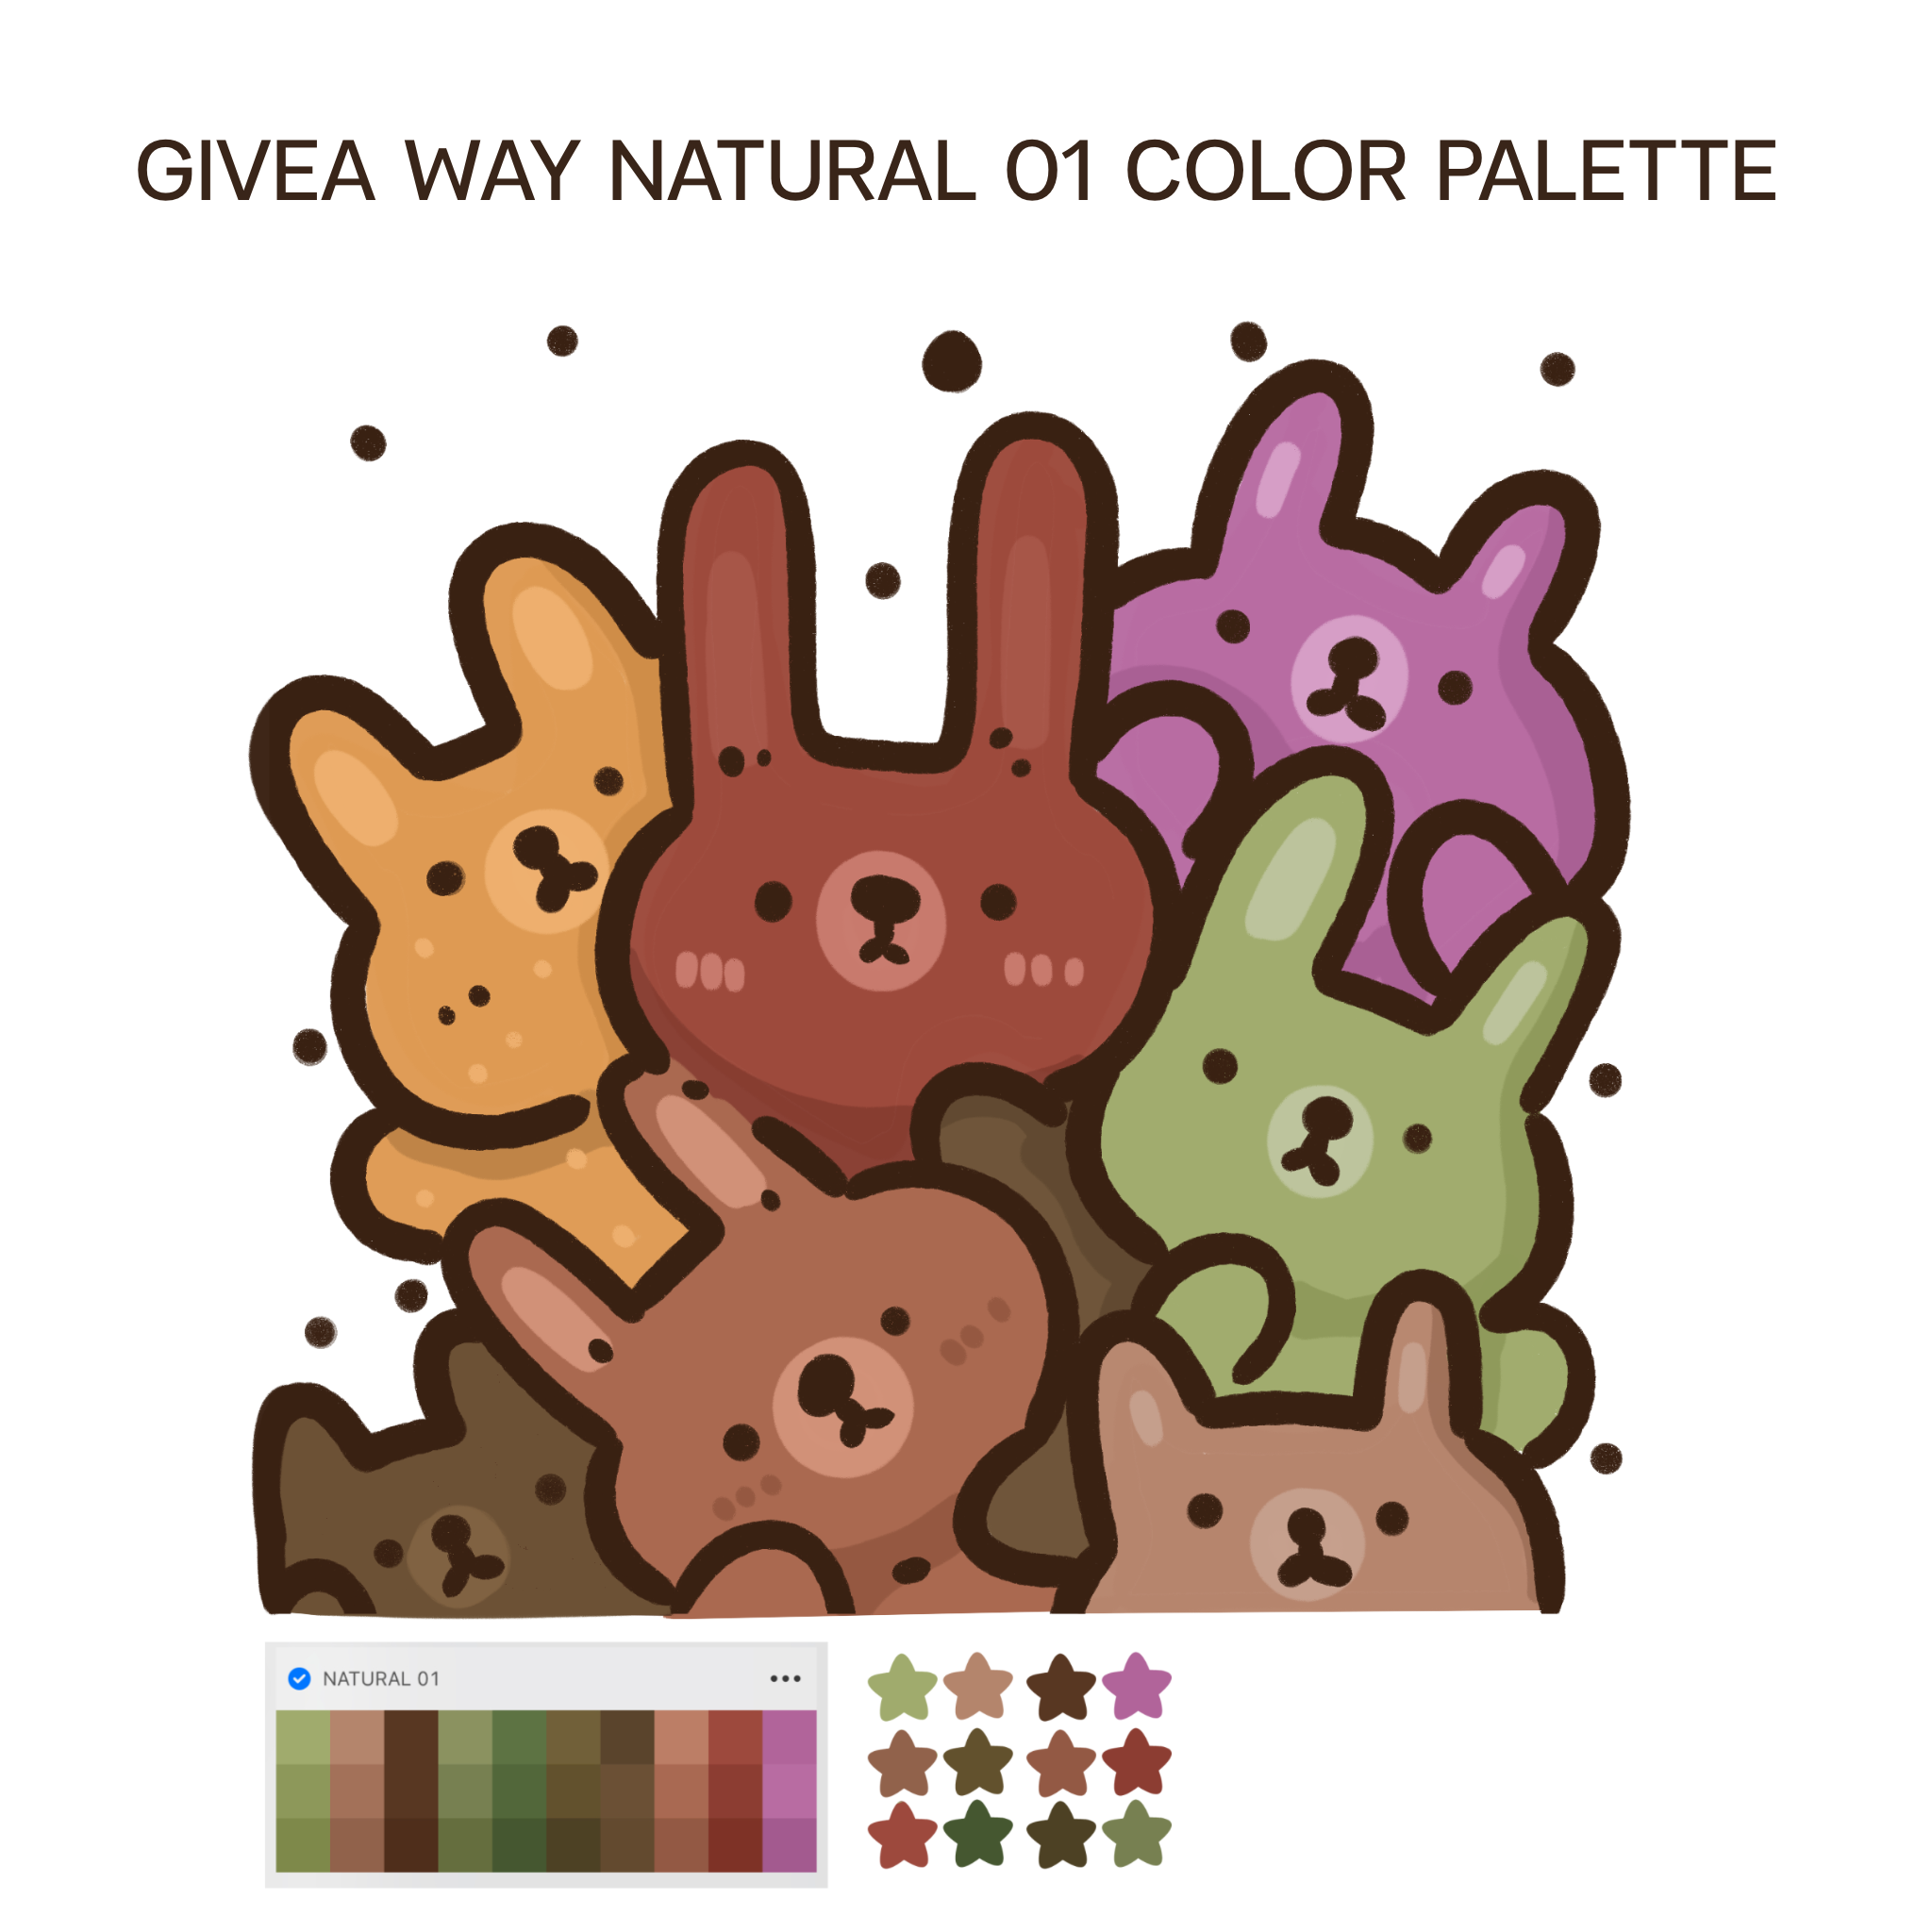 GIVE AWAY NATURAL 01 COLOR PALETTE